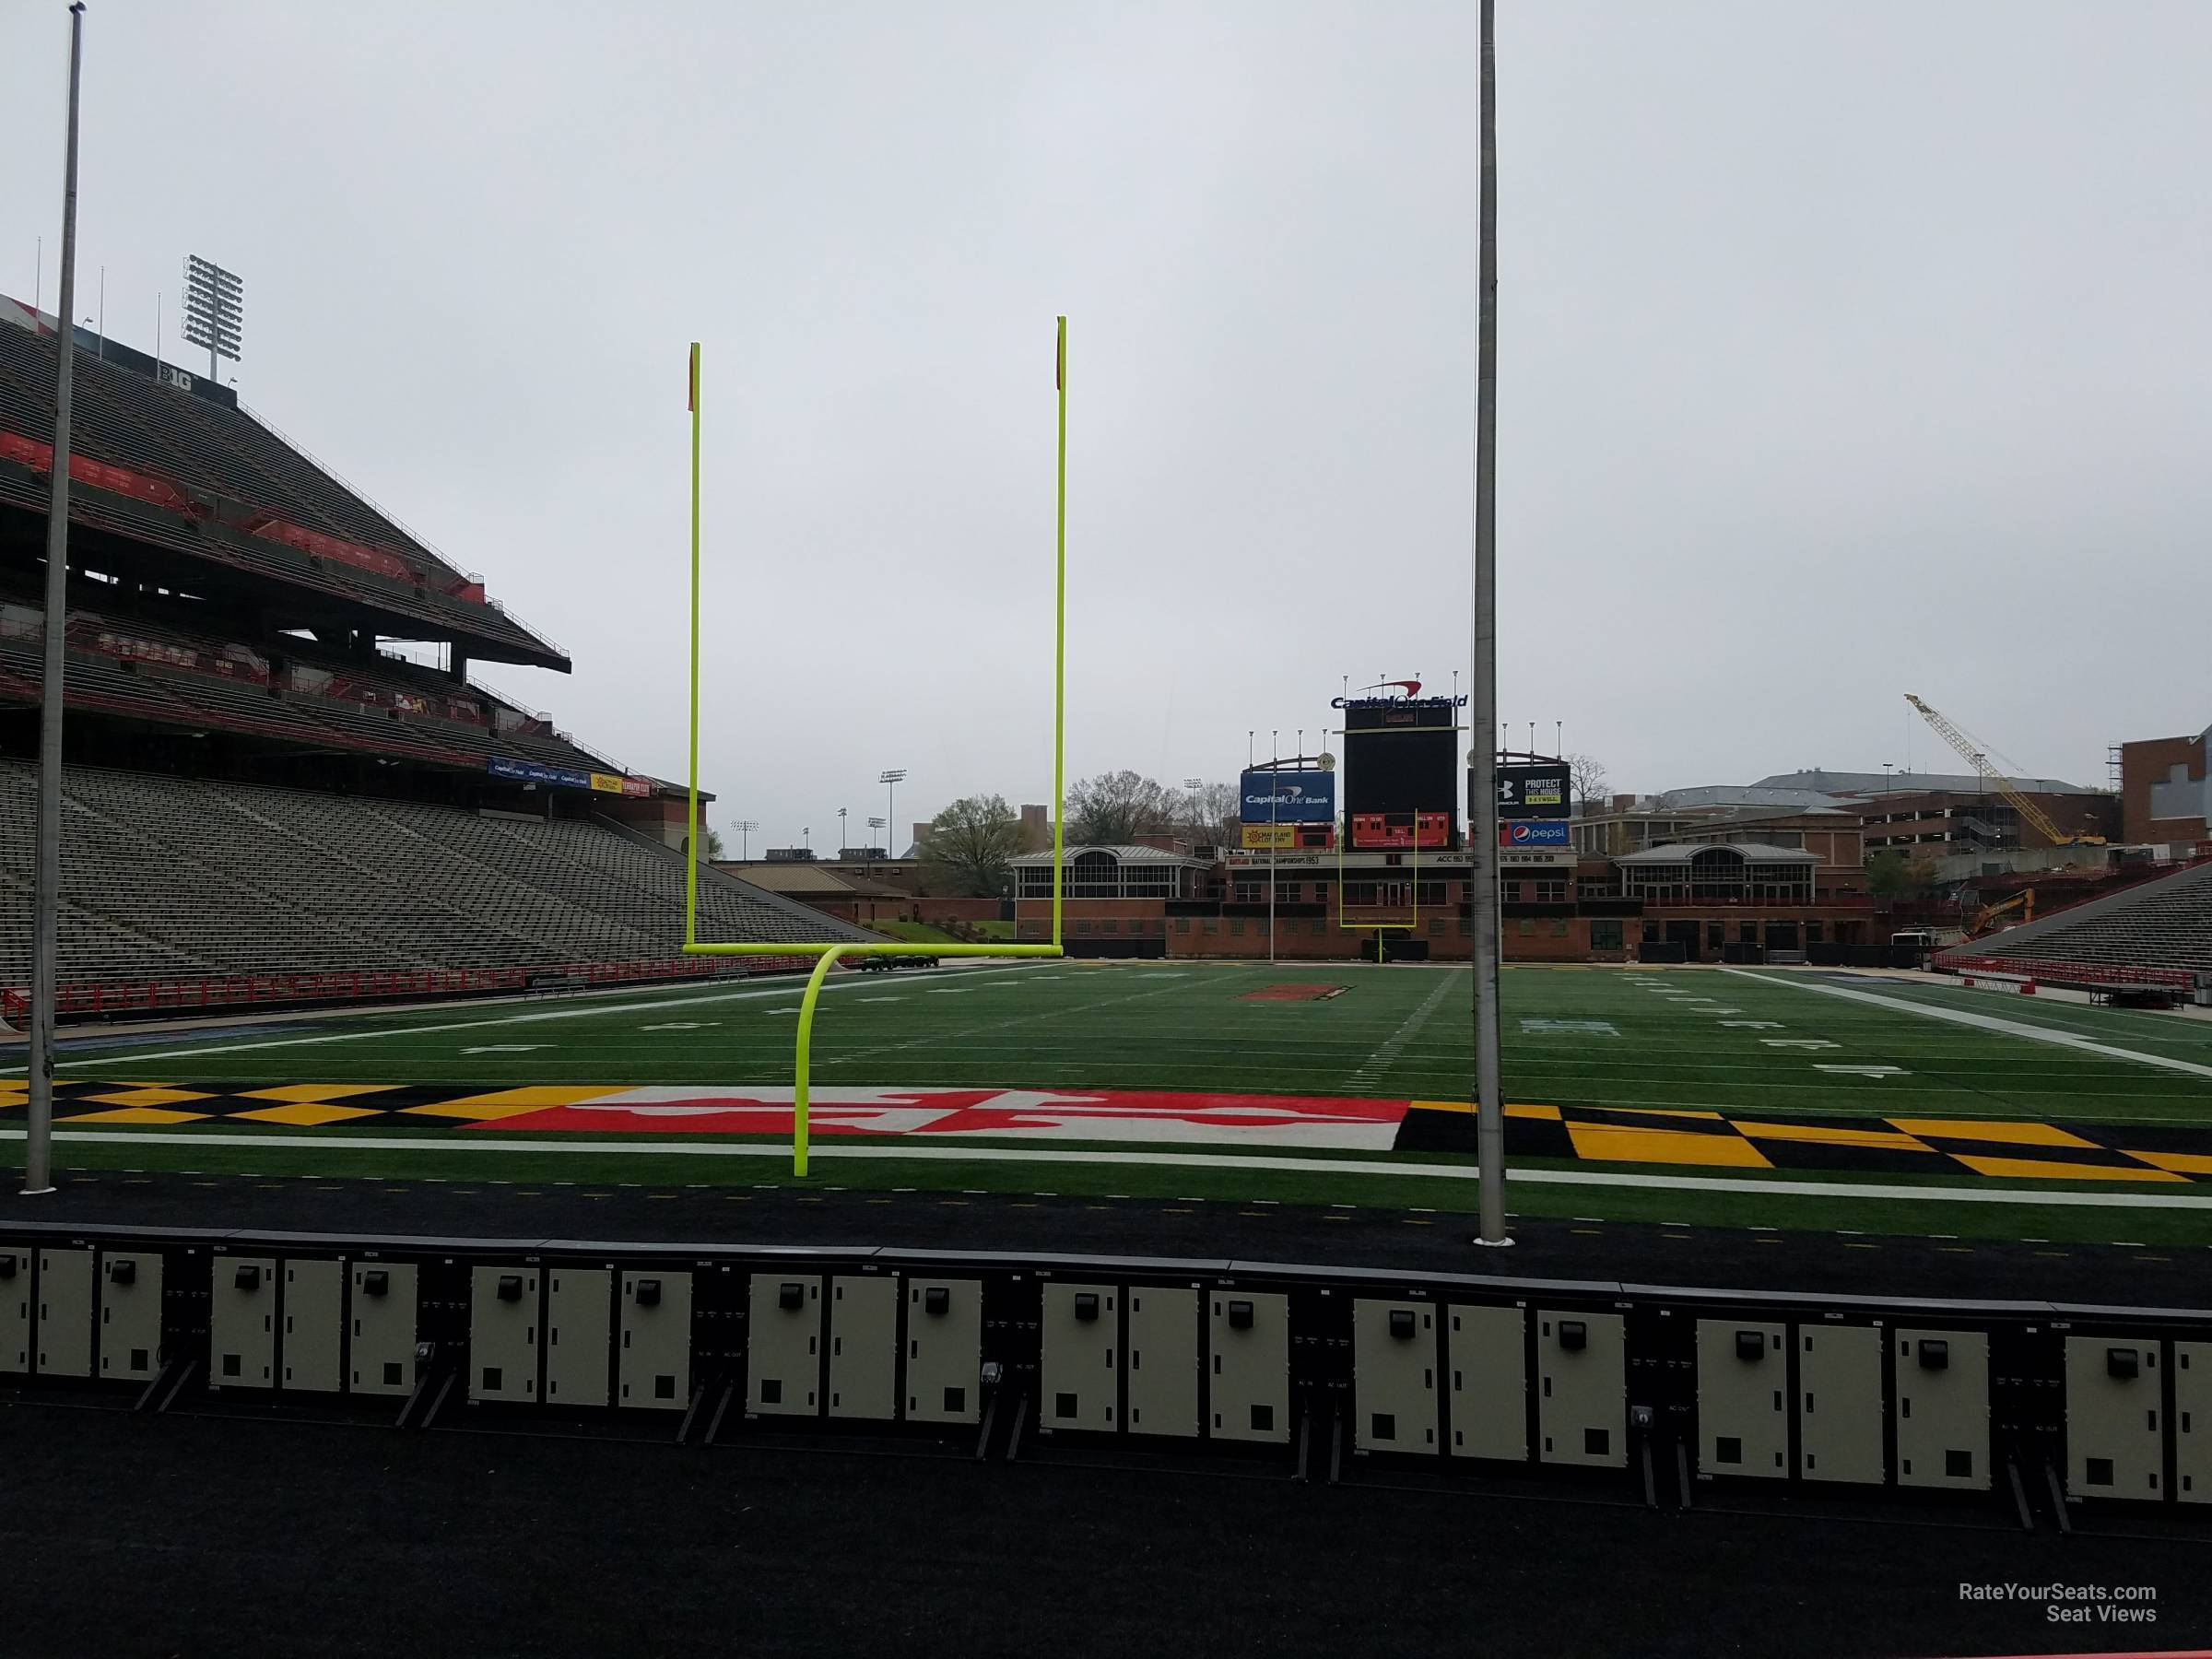 section 16, row g seat view  - maryland stadium